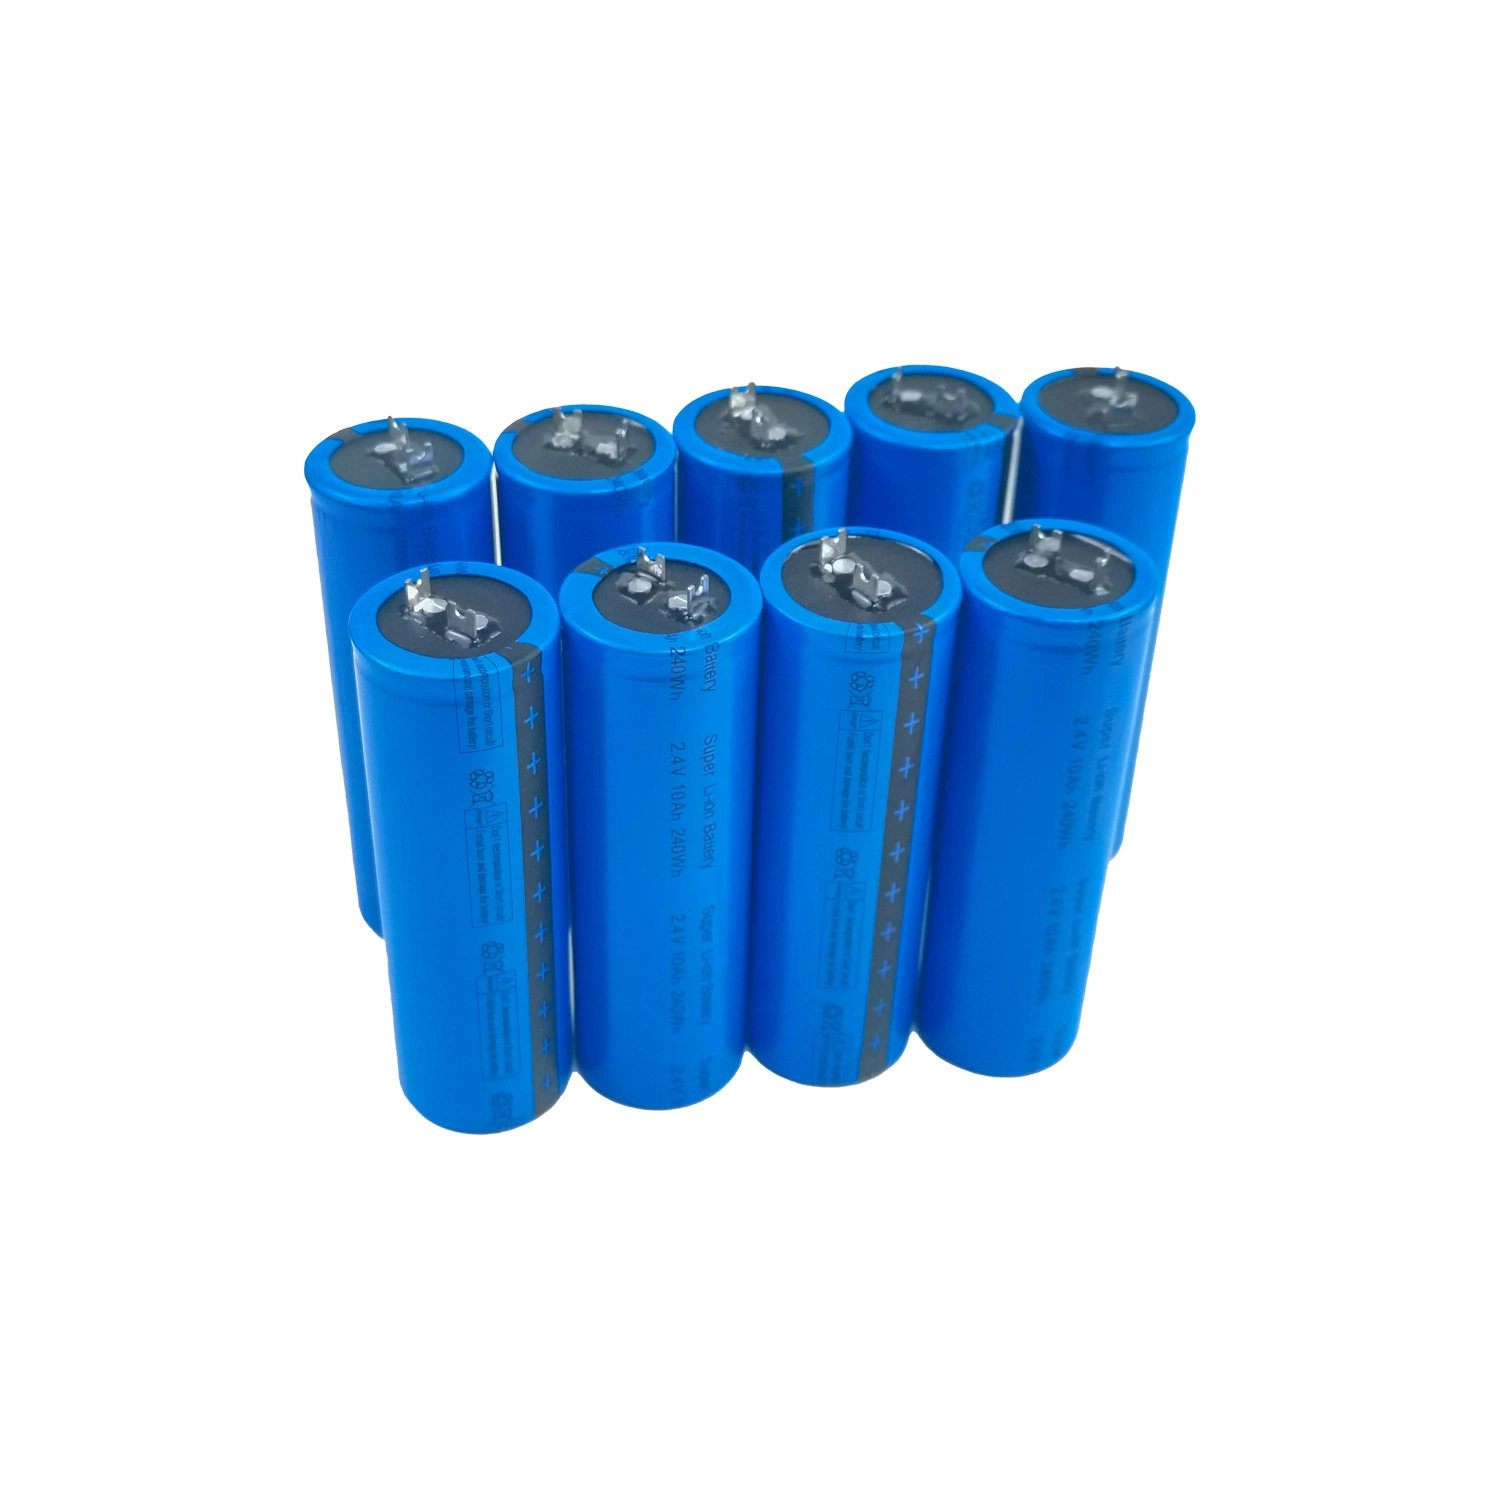 New Energy Lto Battery Pack 2.4V 10ah Li-ion Cylindrical Cell 40120/40130 Lithium Titanate Battery for Toy Car/ Soar System/Electric Tool